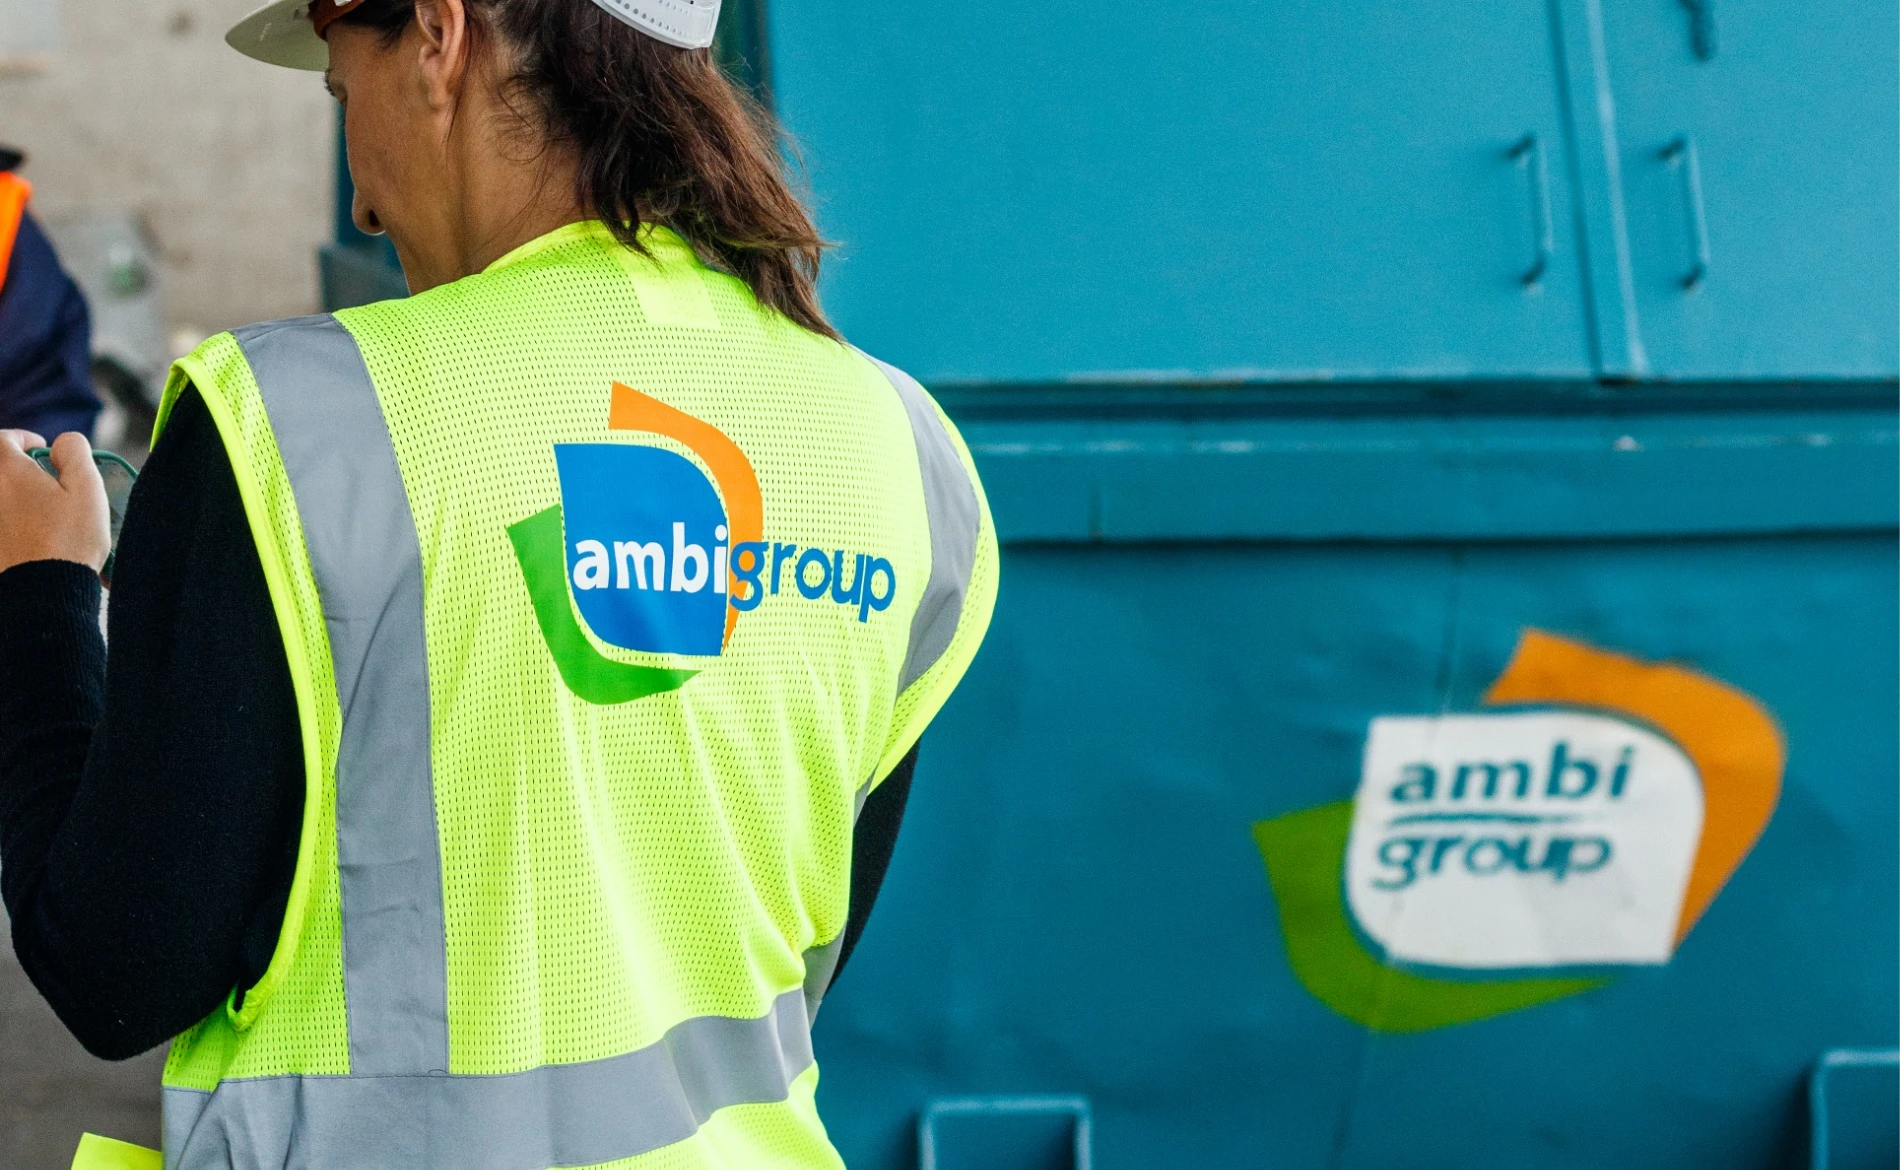 Come join the Ambigroup team